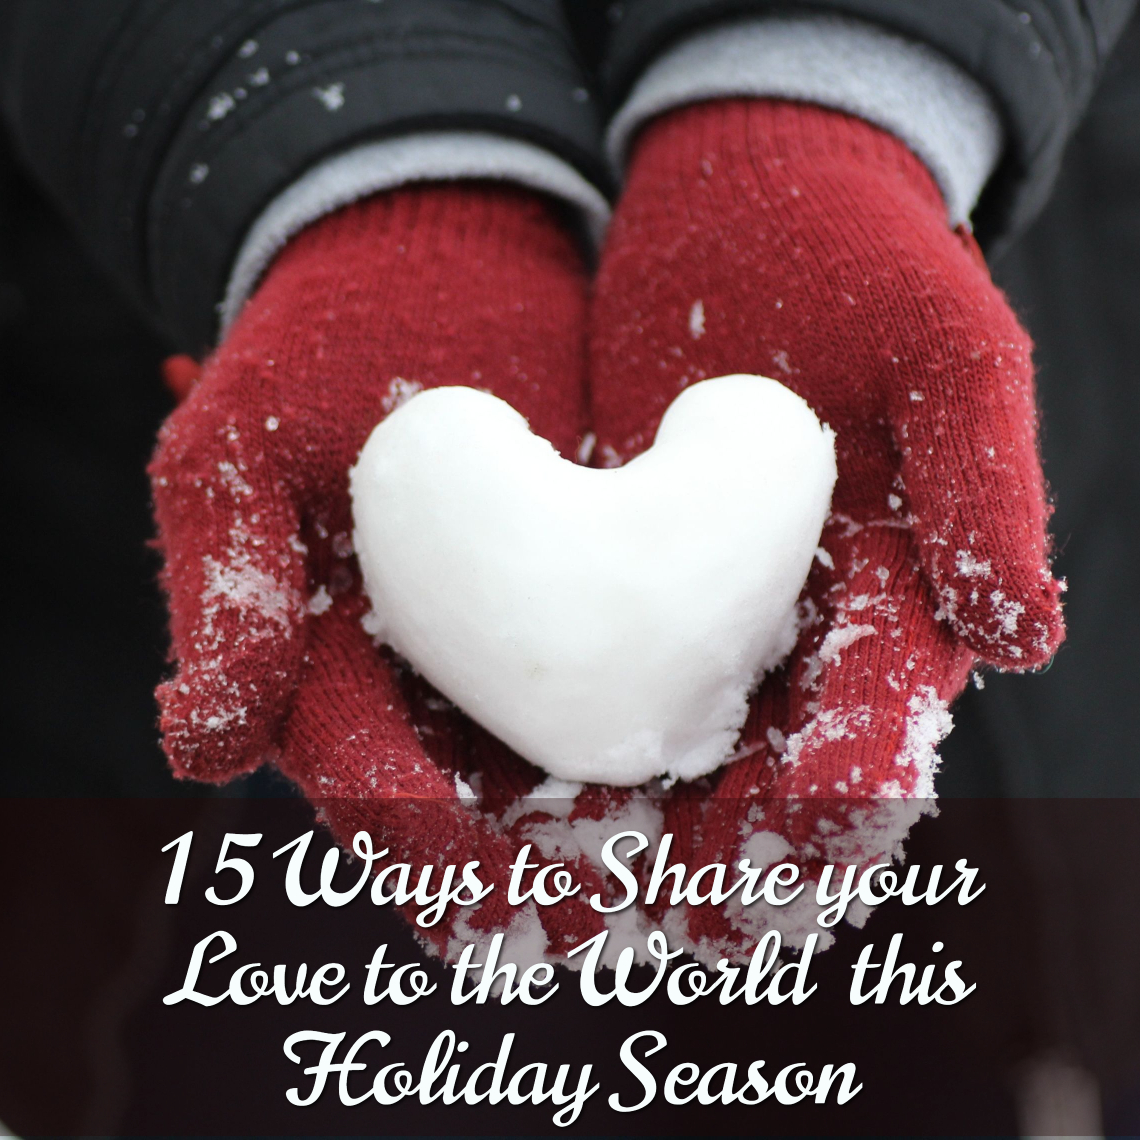 50 Ways to Share the Love this Holiday